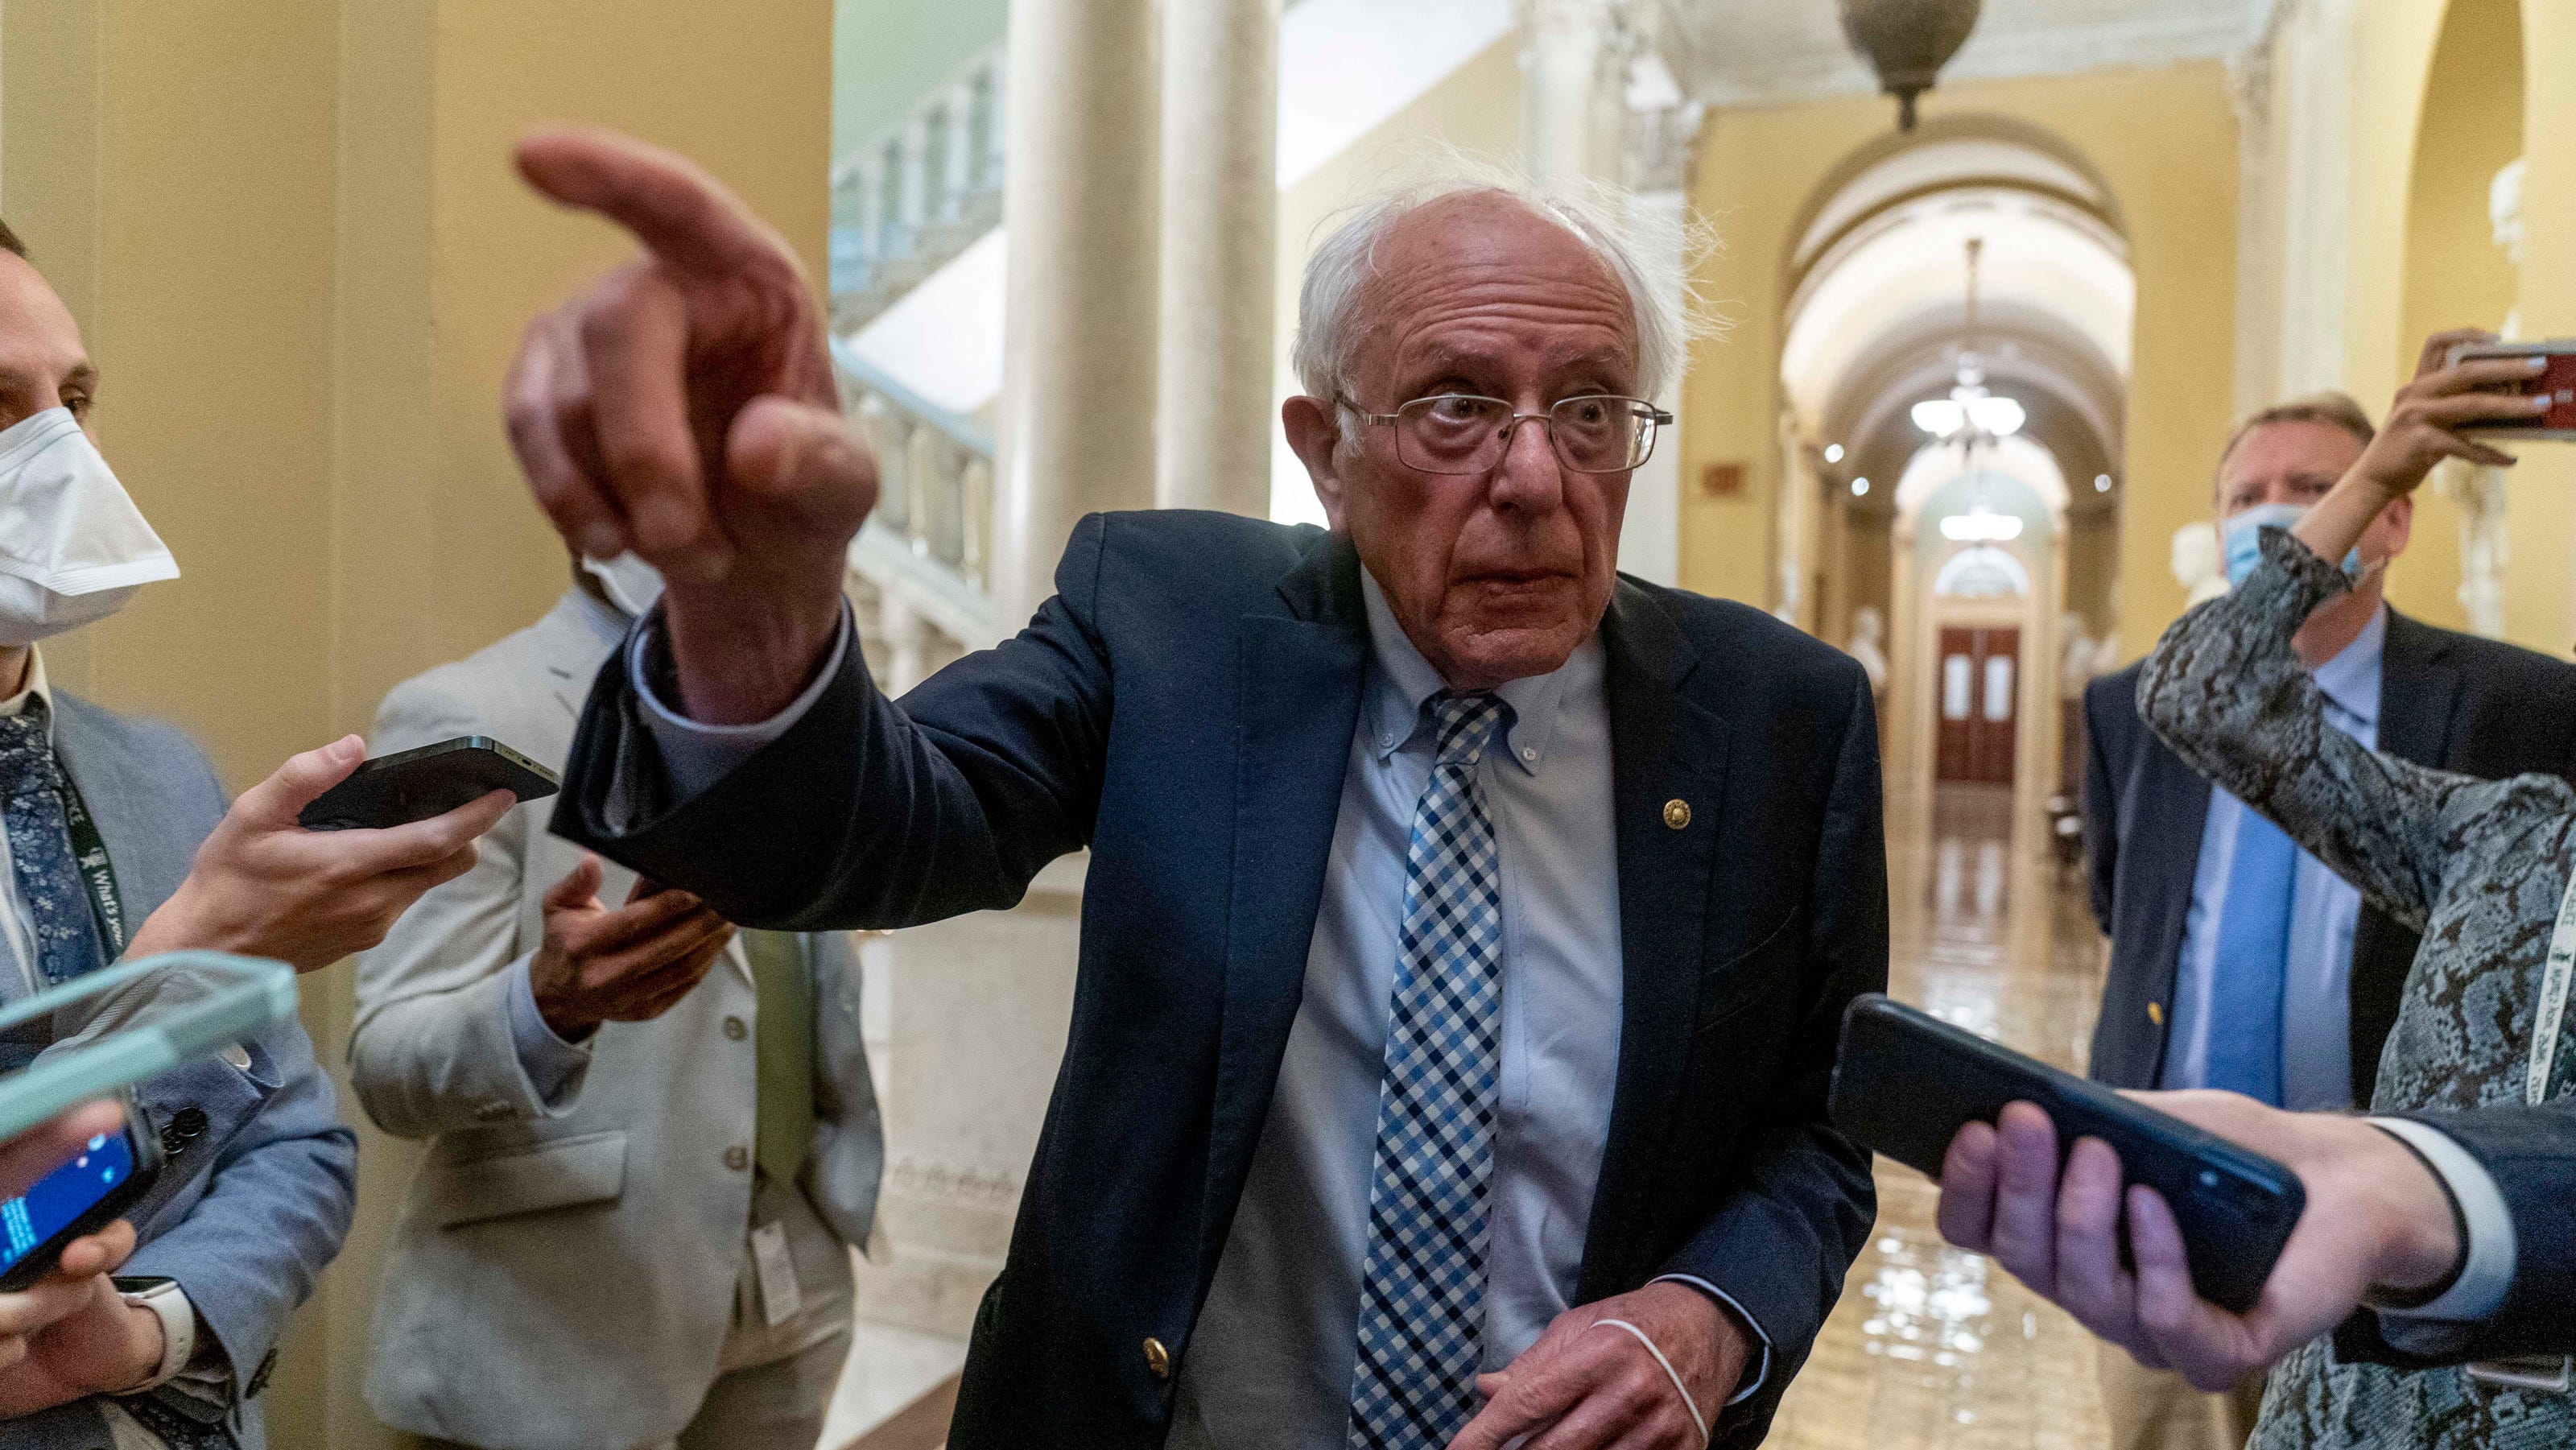 Bernie Sanders criticizes Inflation Reduction Act, says it will have 'minimal impact'